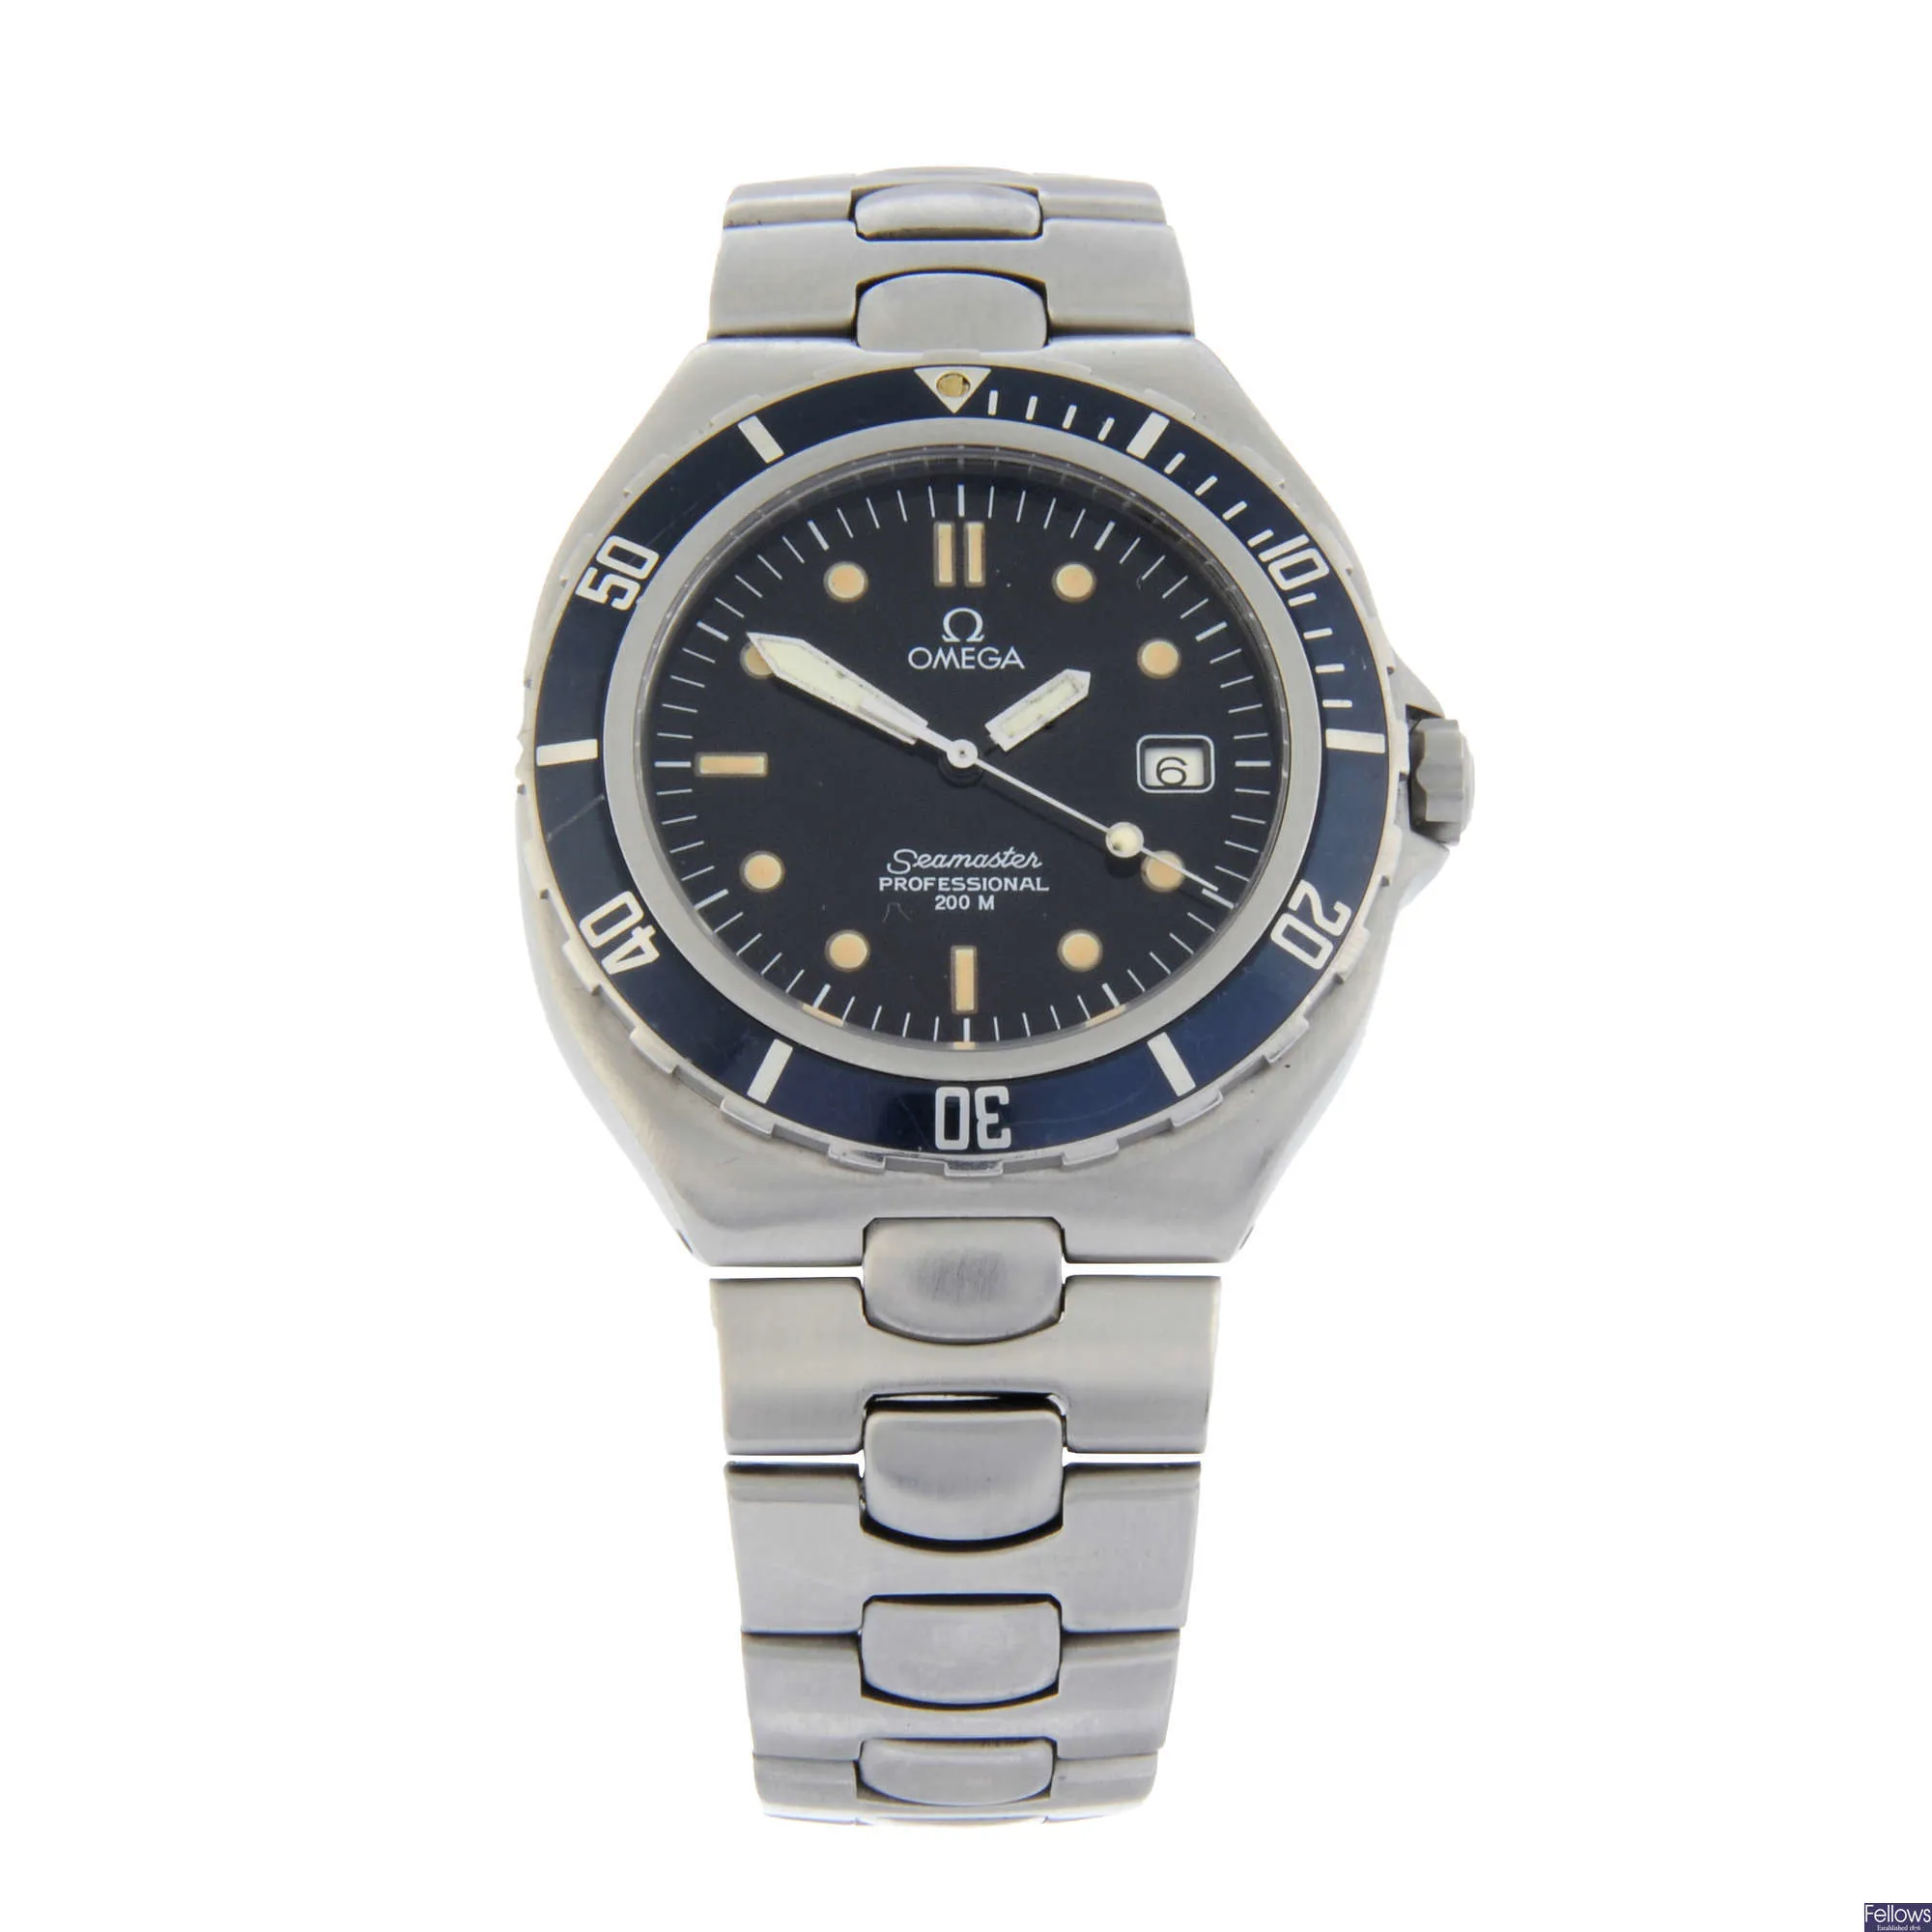 Omega Seamaster Professional 396.1004.3 39mm Stainless steel Black